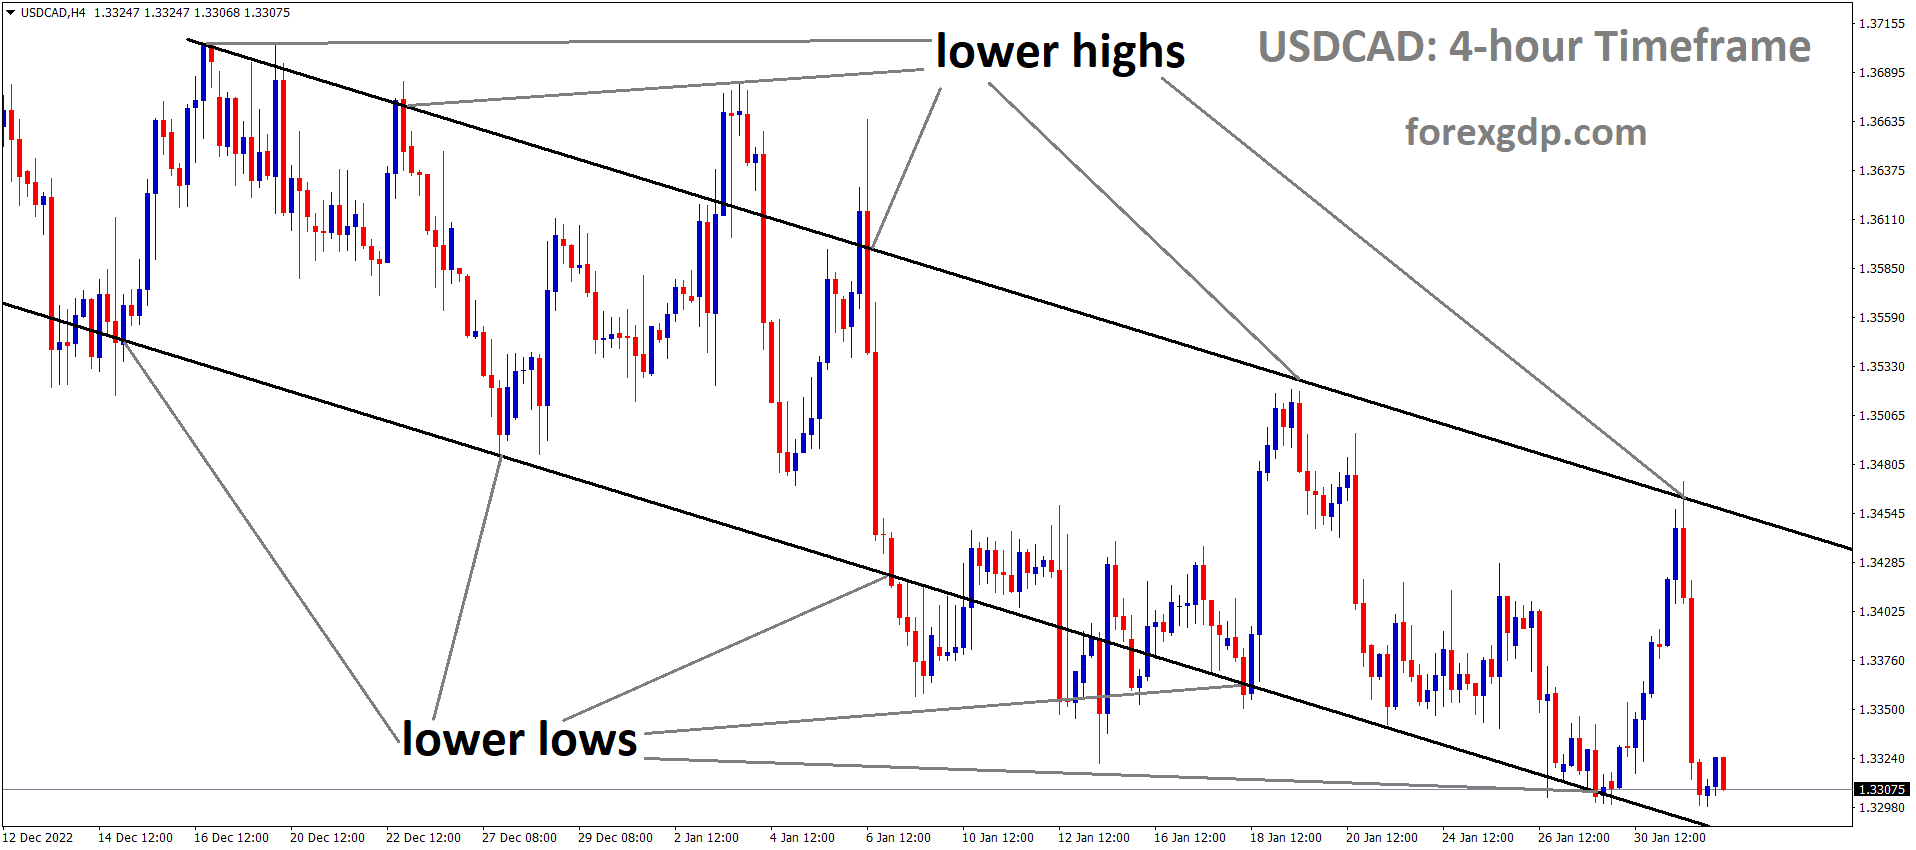 USDCAD H4 TF analysis Market is moving in the Descending channel and the market has reached the lower low area of the channel